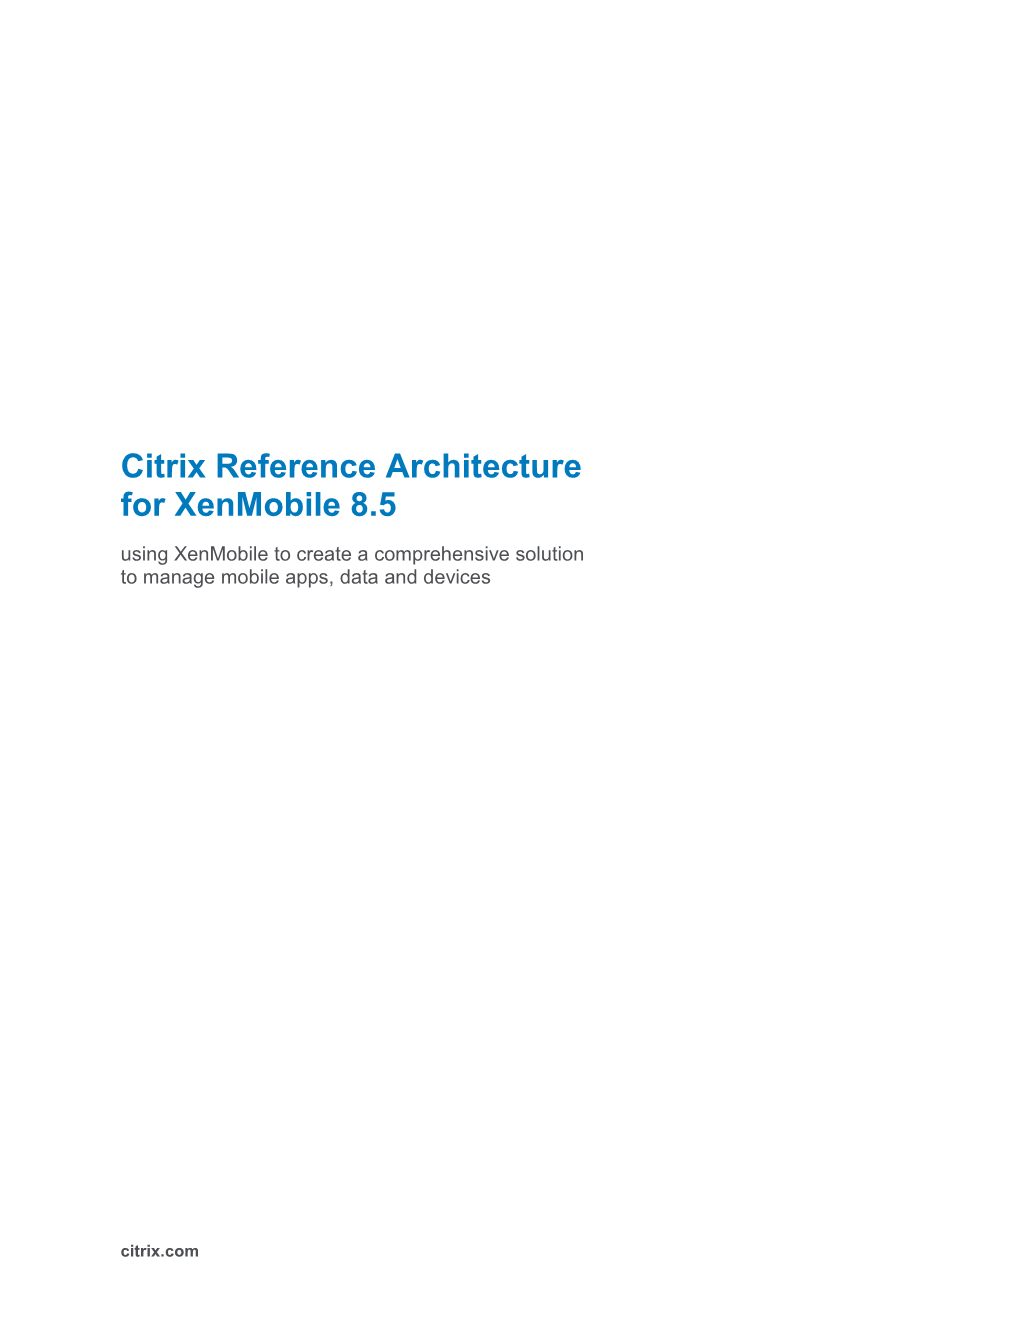 Citrix Reference Architecture for Xenmobile 8.5 Using Xenmobile to Create a Comprehensive Solution to Manage Mobile Apps, Data and Devices